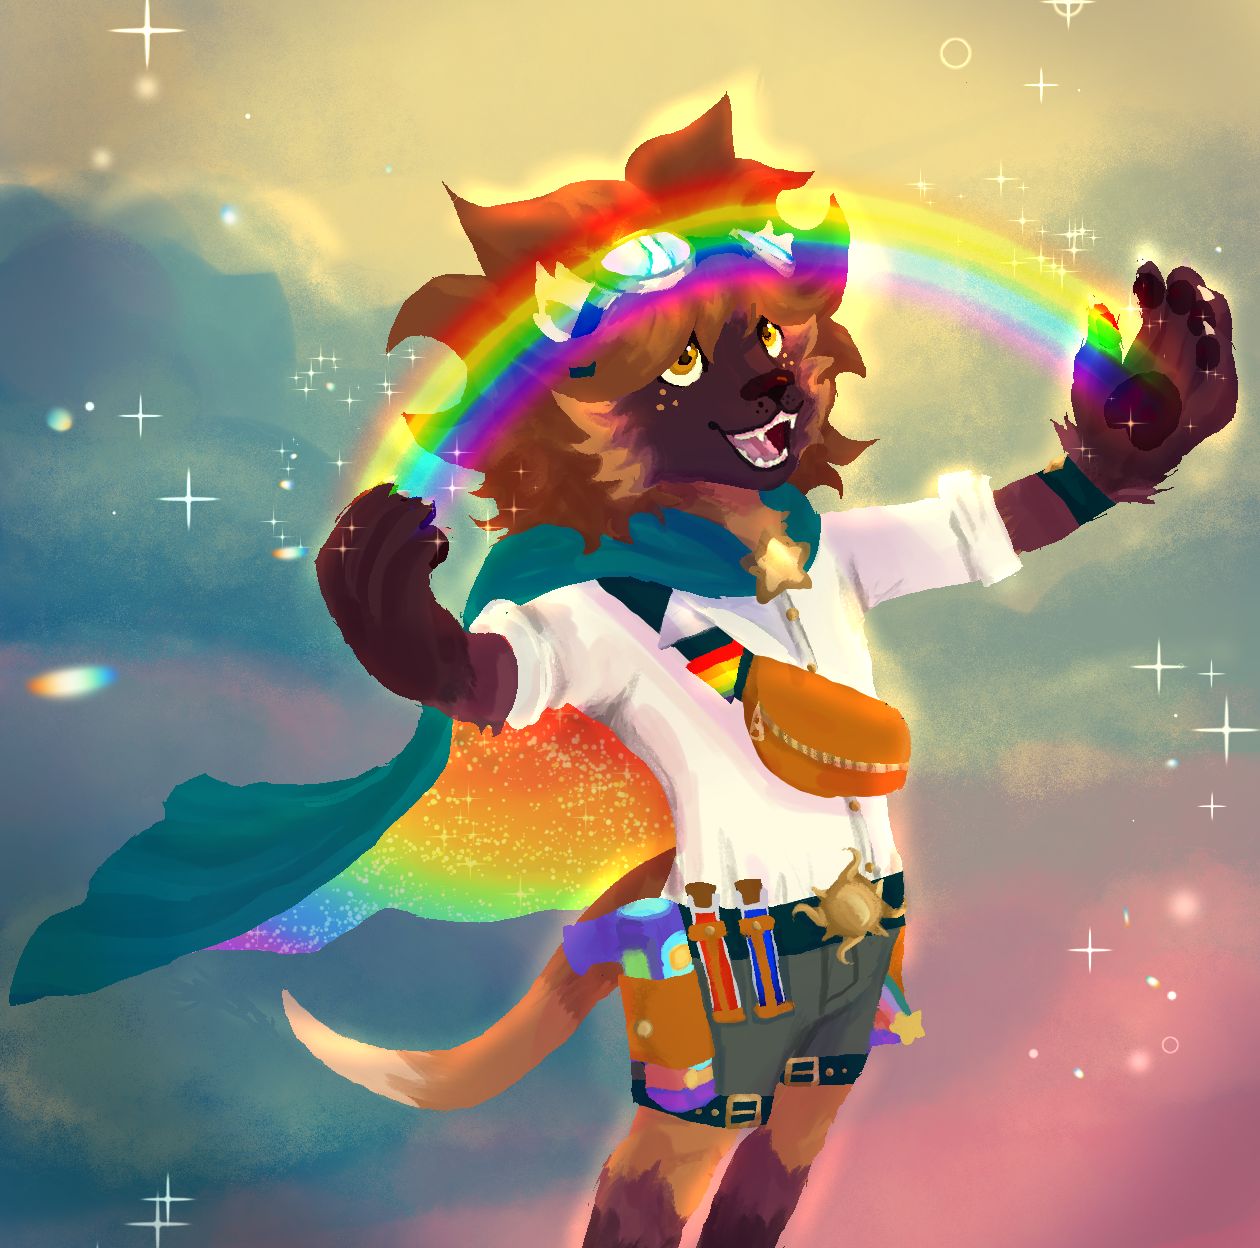 A painting of an anthropomorphic brown-furred wolverine otter hybrid. He is spreading a rainbow between his paws.